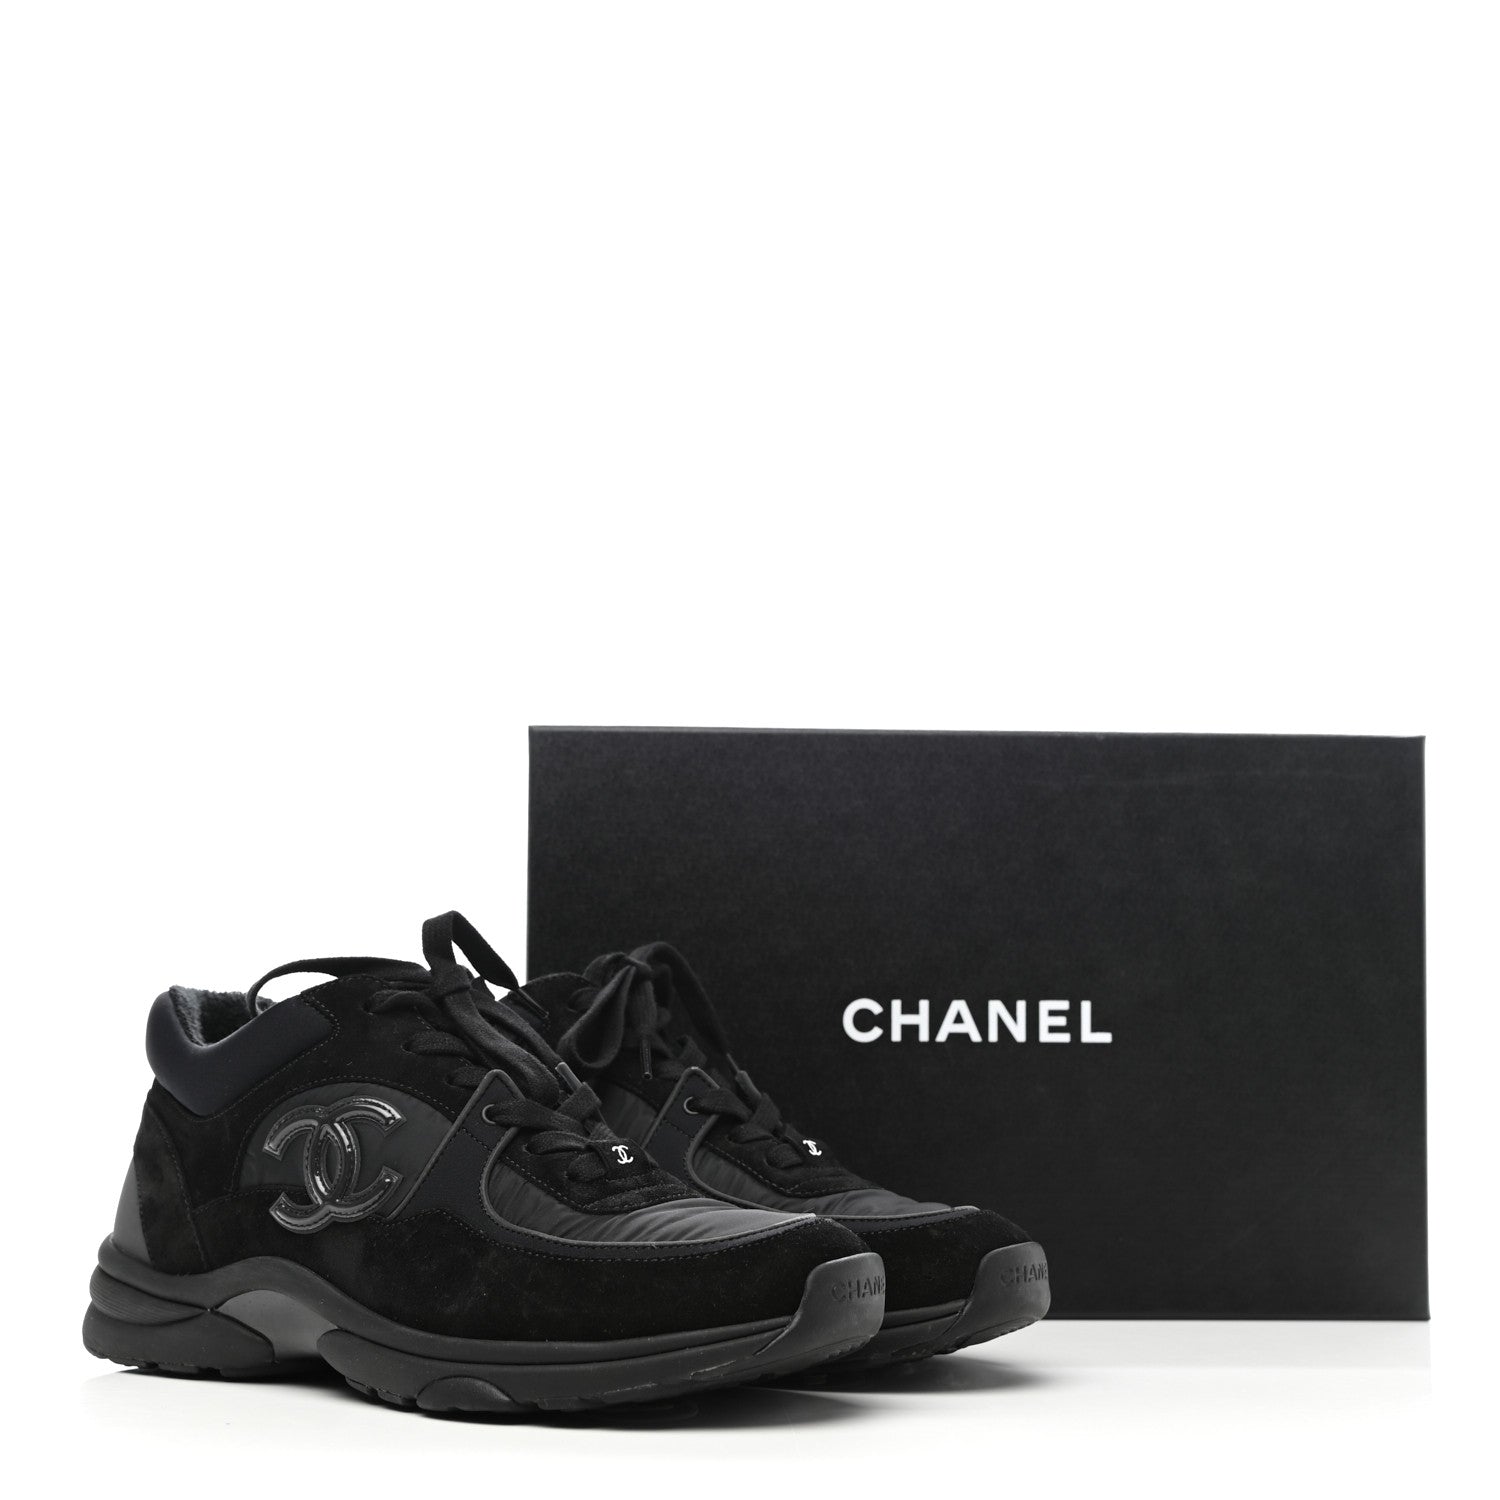 CHANEL Black Suede Athletic Shoes for Women for sale